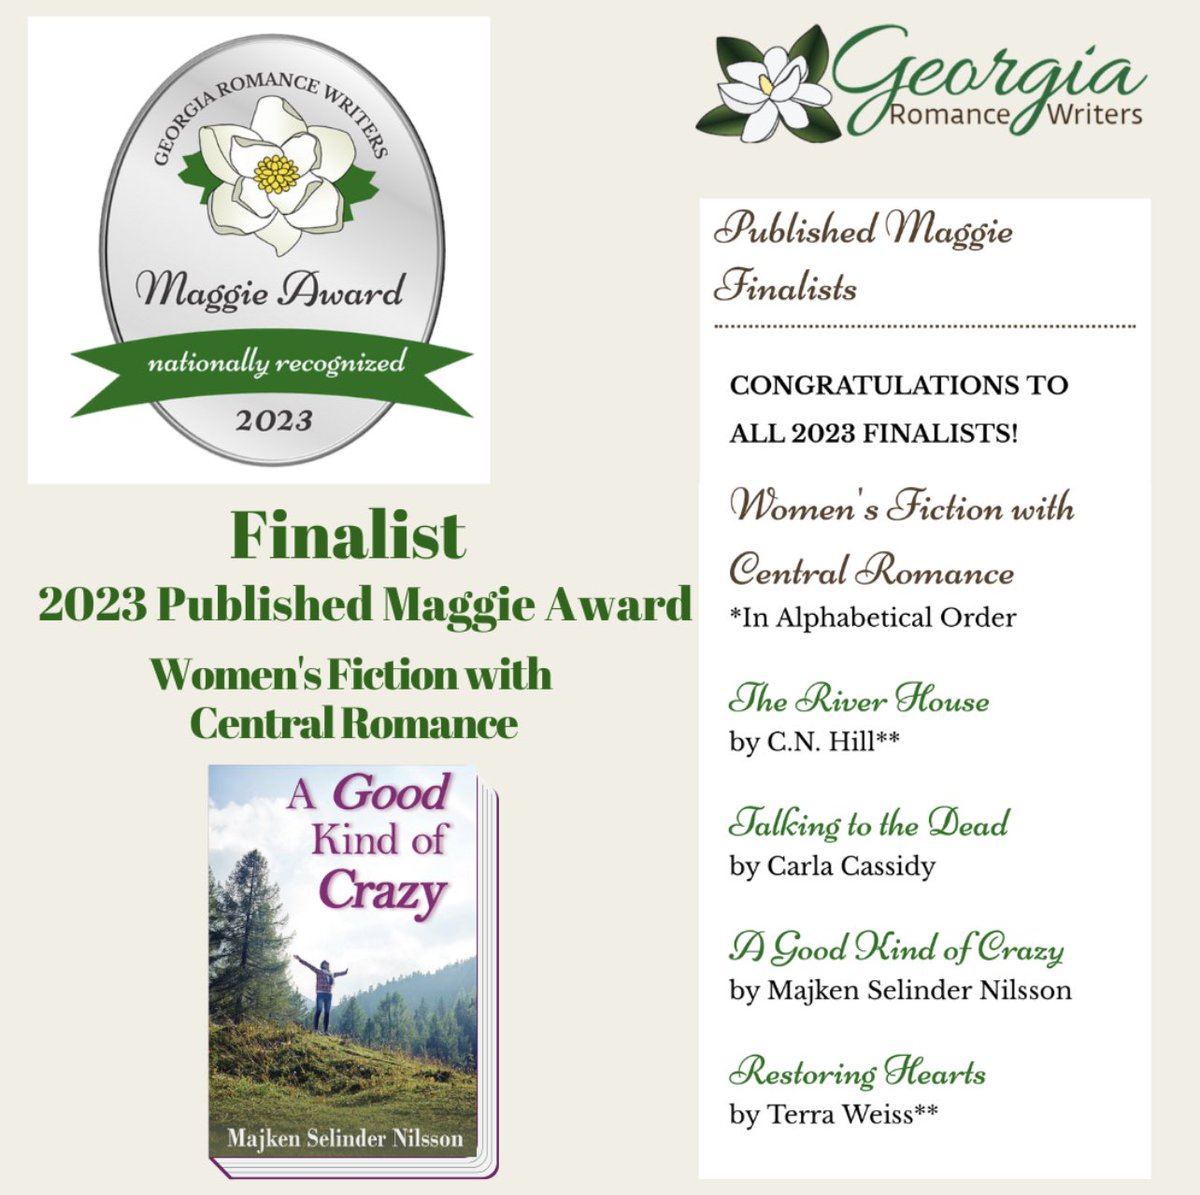 I’m so excited & honored that my book, A Good Kind of Crazy, has been chosen as 1 of 4 books in the running for the Maggie Award in the Women’s Fiction with Central Romance category from the Georgia Romance Writers. #maggieawards #georgiaromancewriters #finalist #recognition